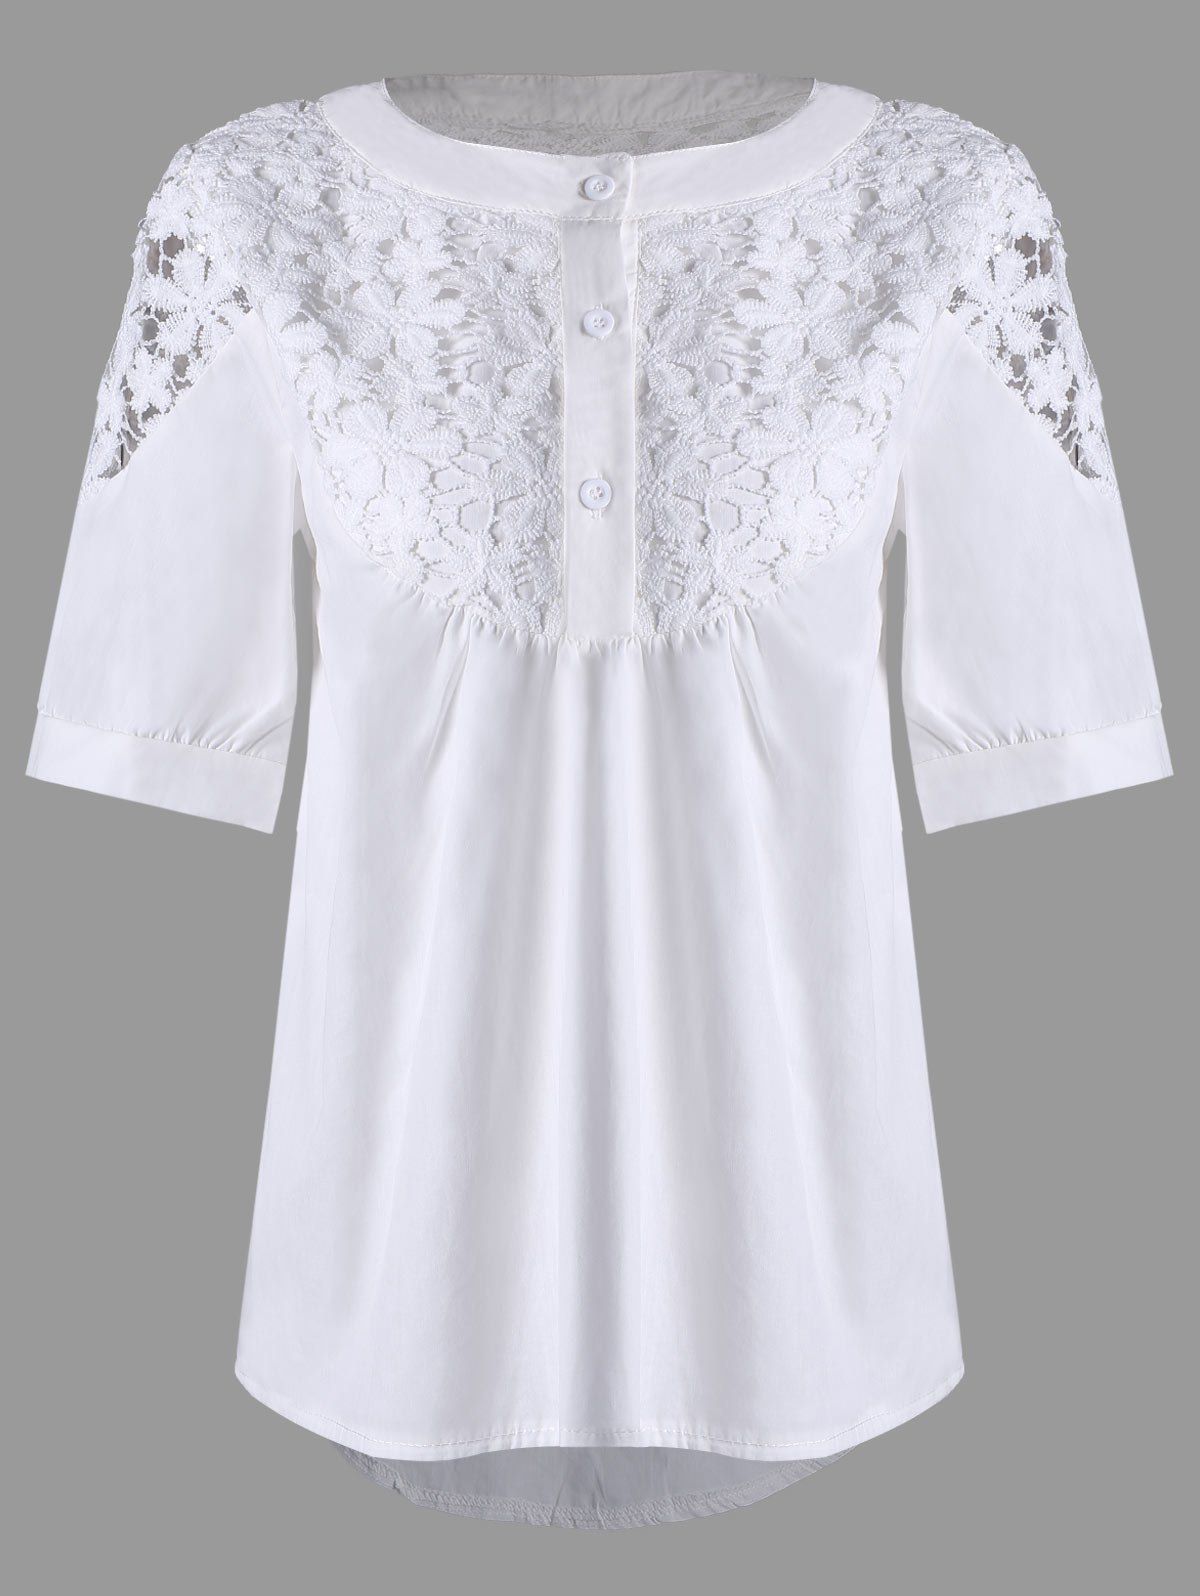 [41% OFF] 2021 Lace Crochet High Low Henley Blouse In WHITE | DressLily